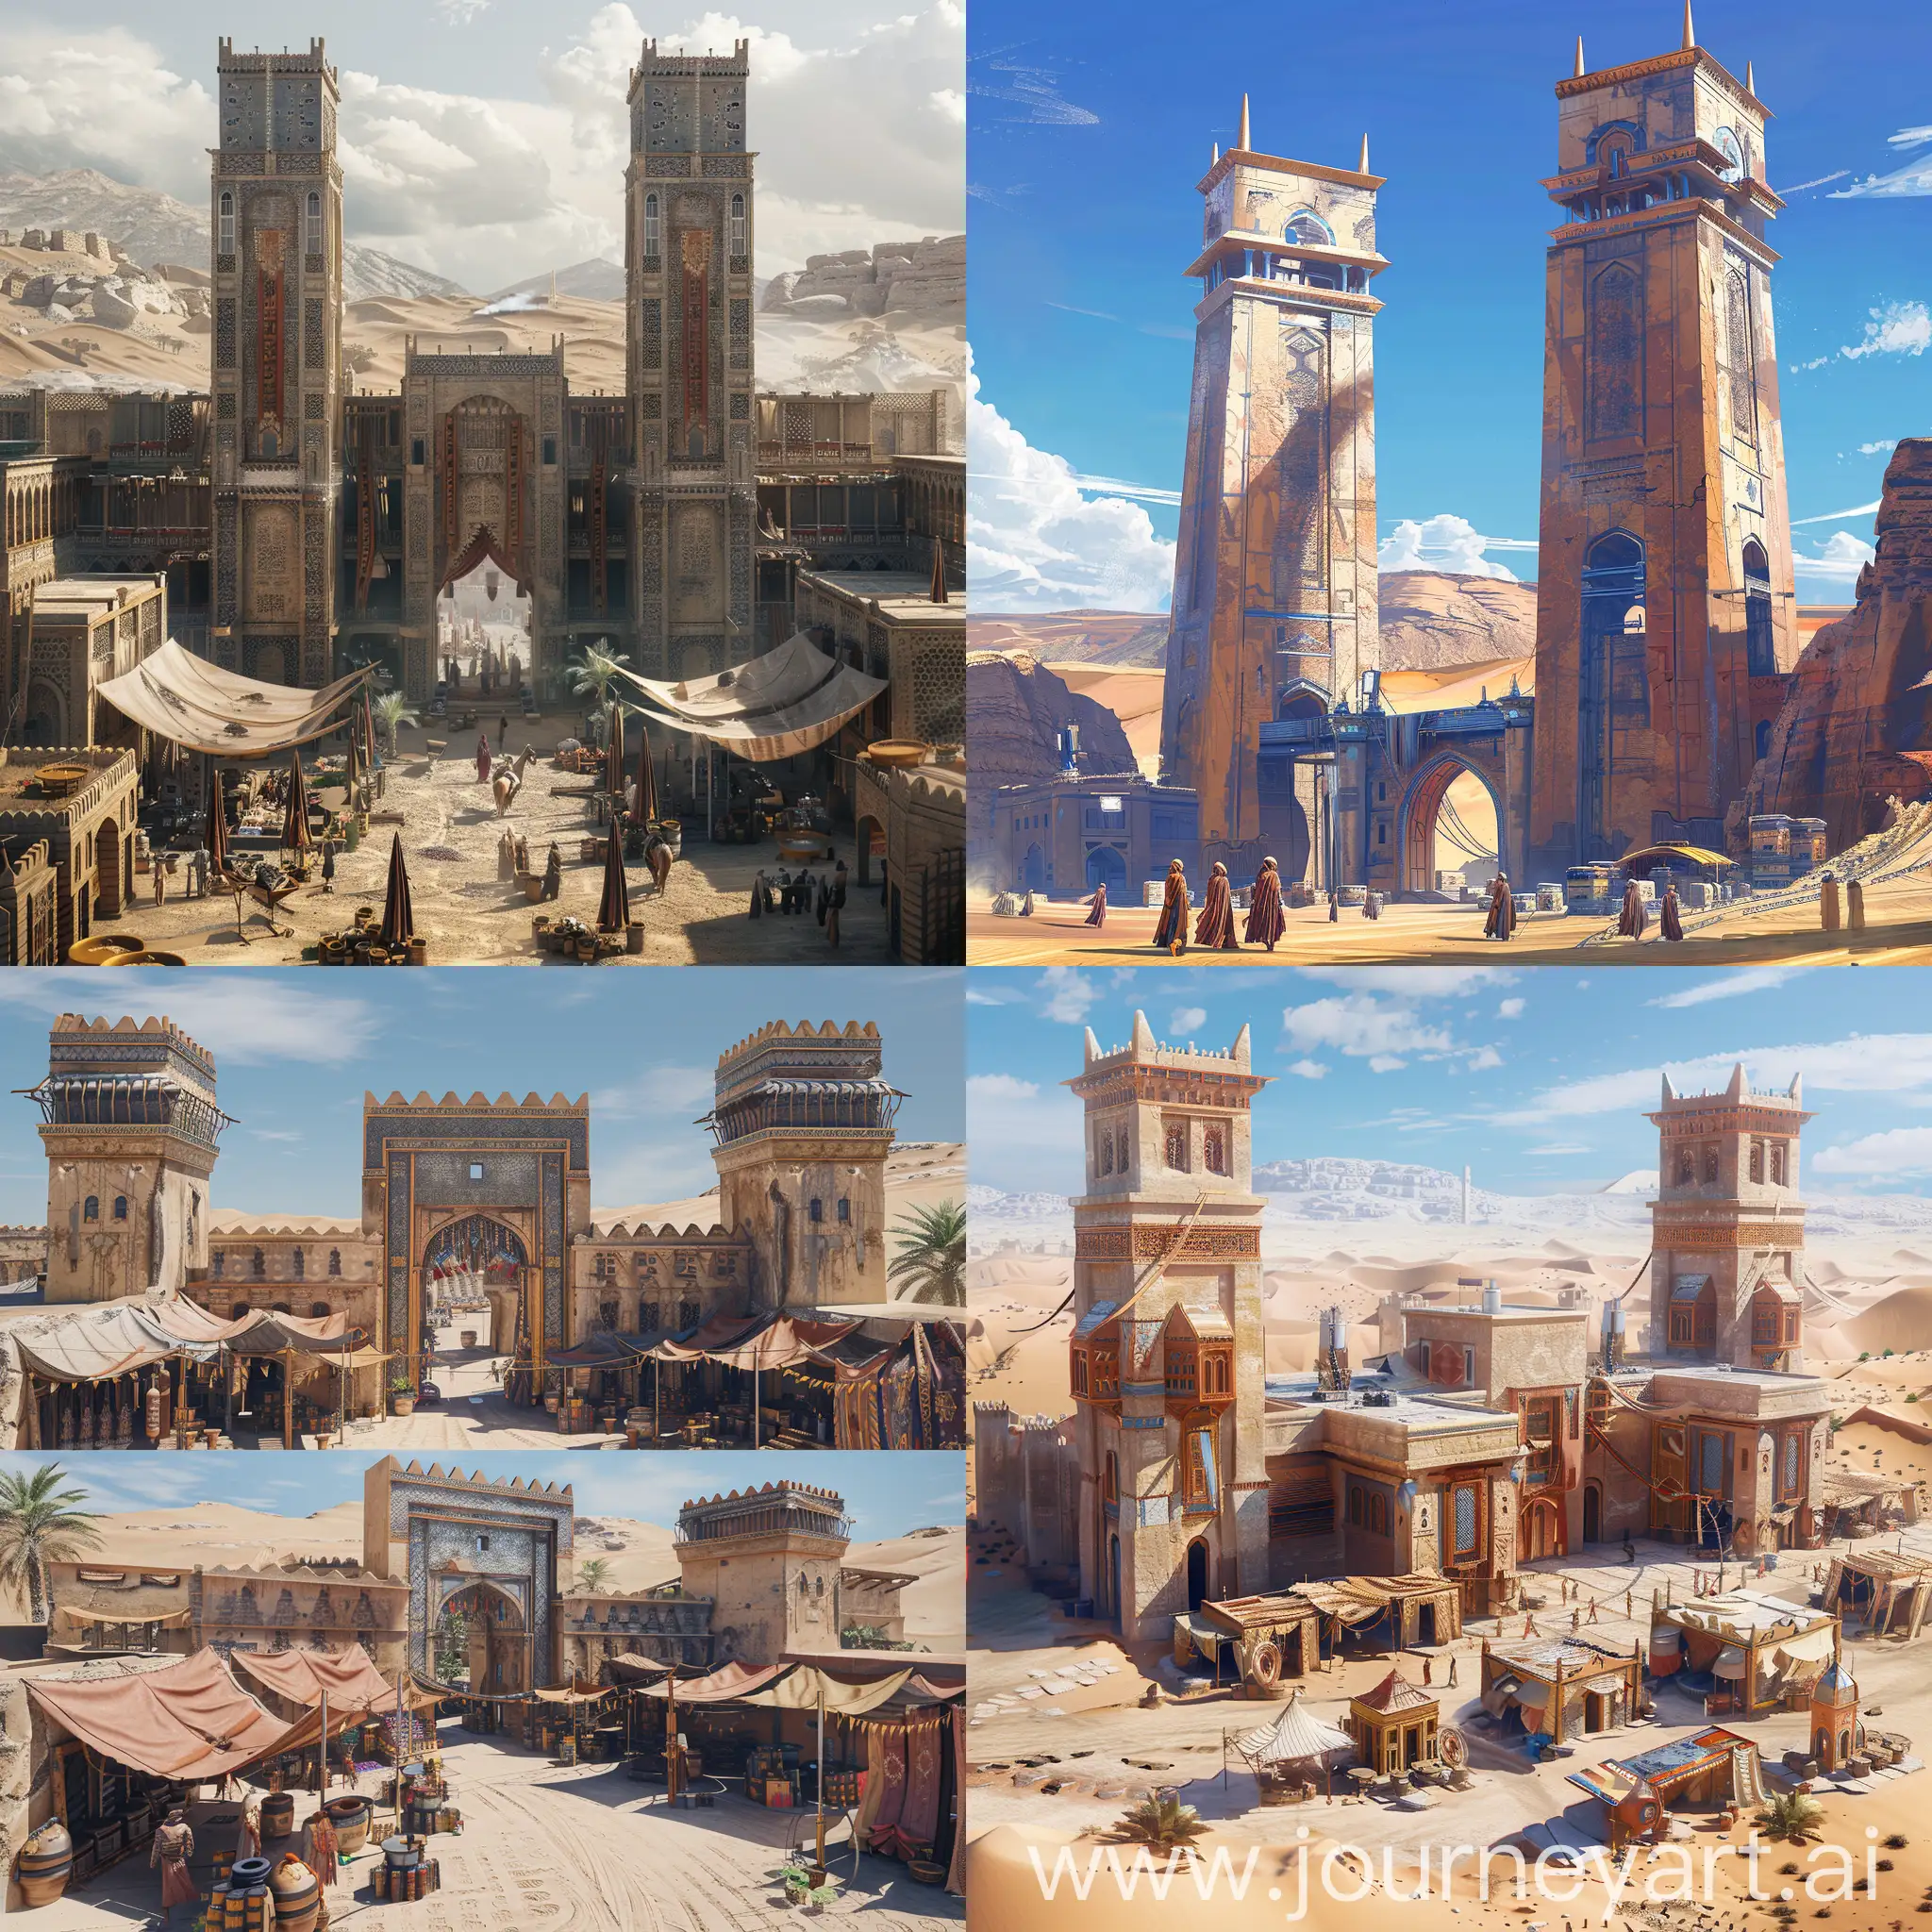 Desert-Middle-EasternInspired-SciFi-Market-with-Twin-Towers